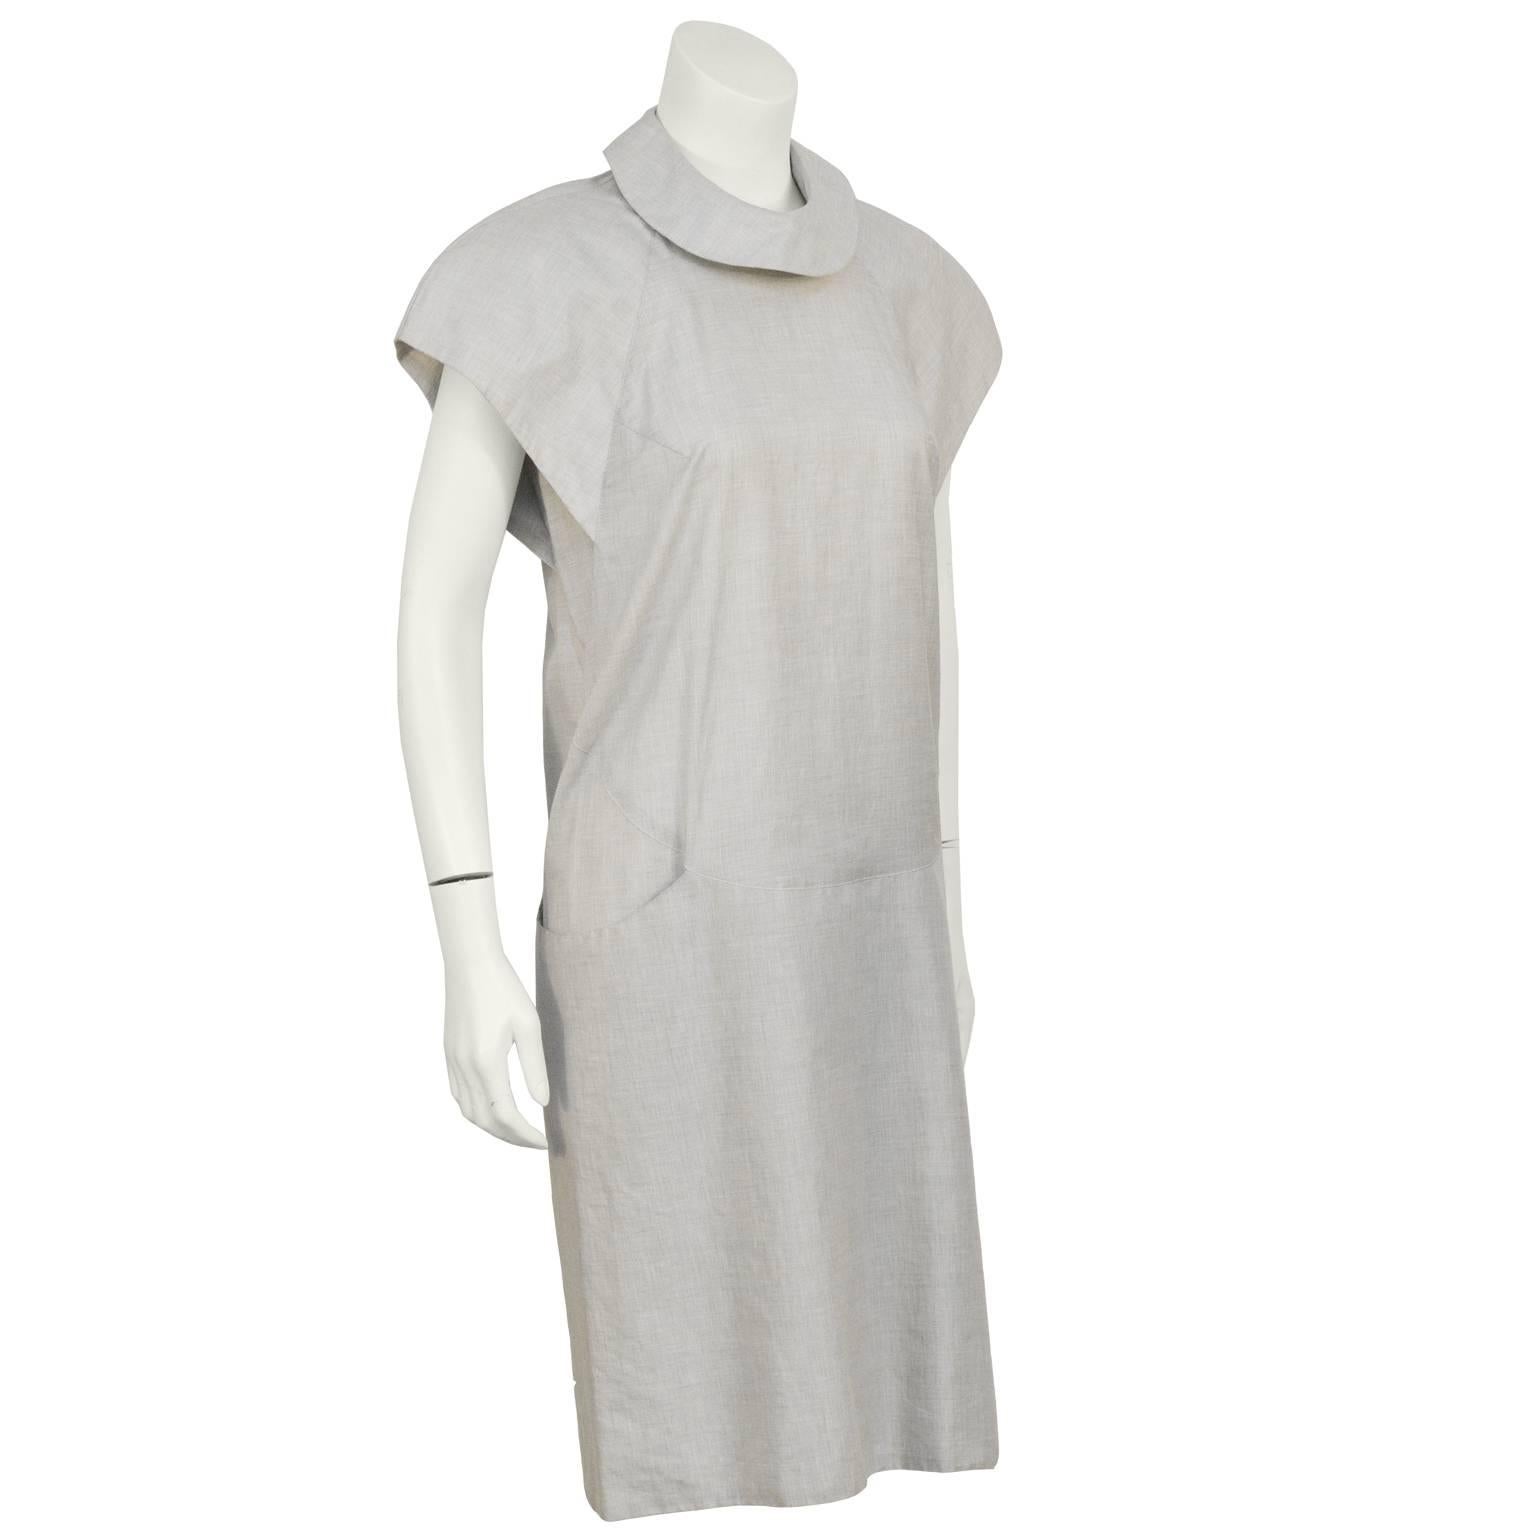 American mid 80's designer Catherine Hipp light grey cotton drop waist day dress. The dress features a circular collar with two loop buttons that fasten at the back and winged capped sleeves. The two large side pockets wrap around the hip creating a